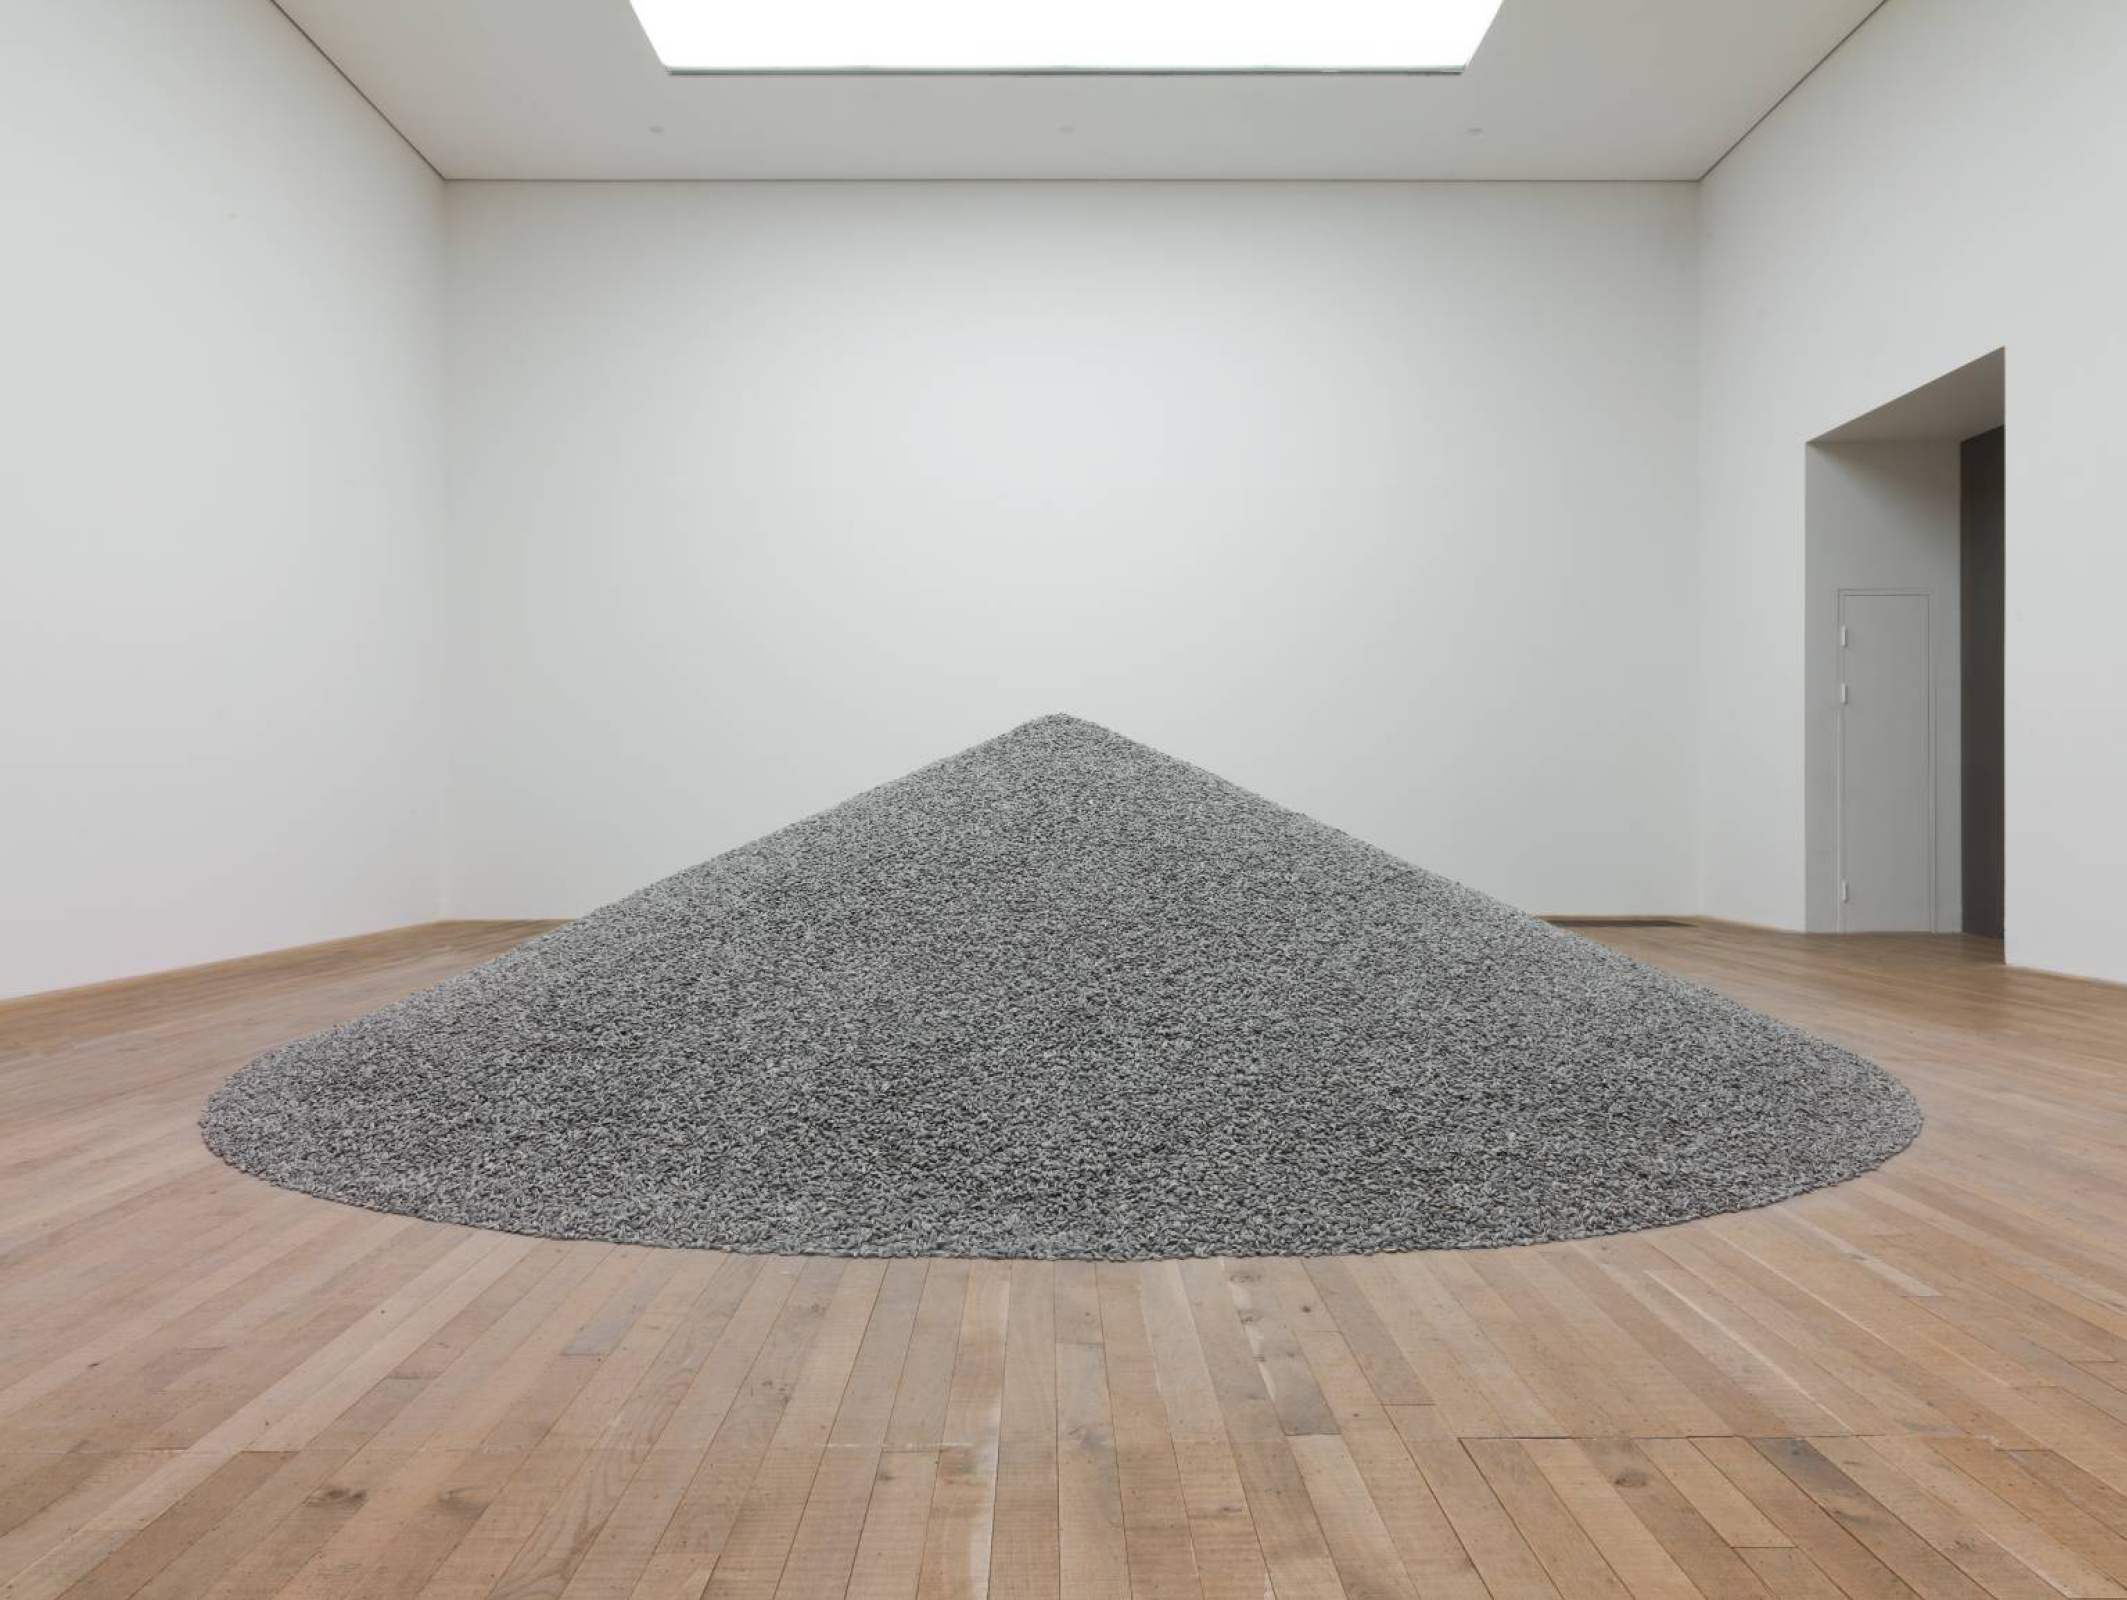 Sunflower seeds, 2010 by Ai Weiwei: History, Analysis & Facts | Arthive